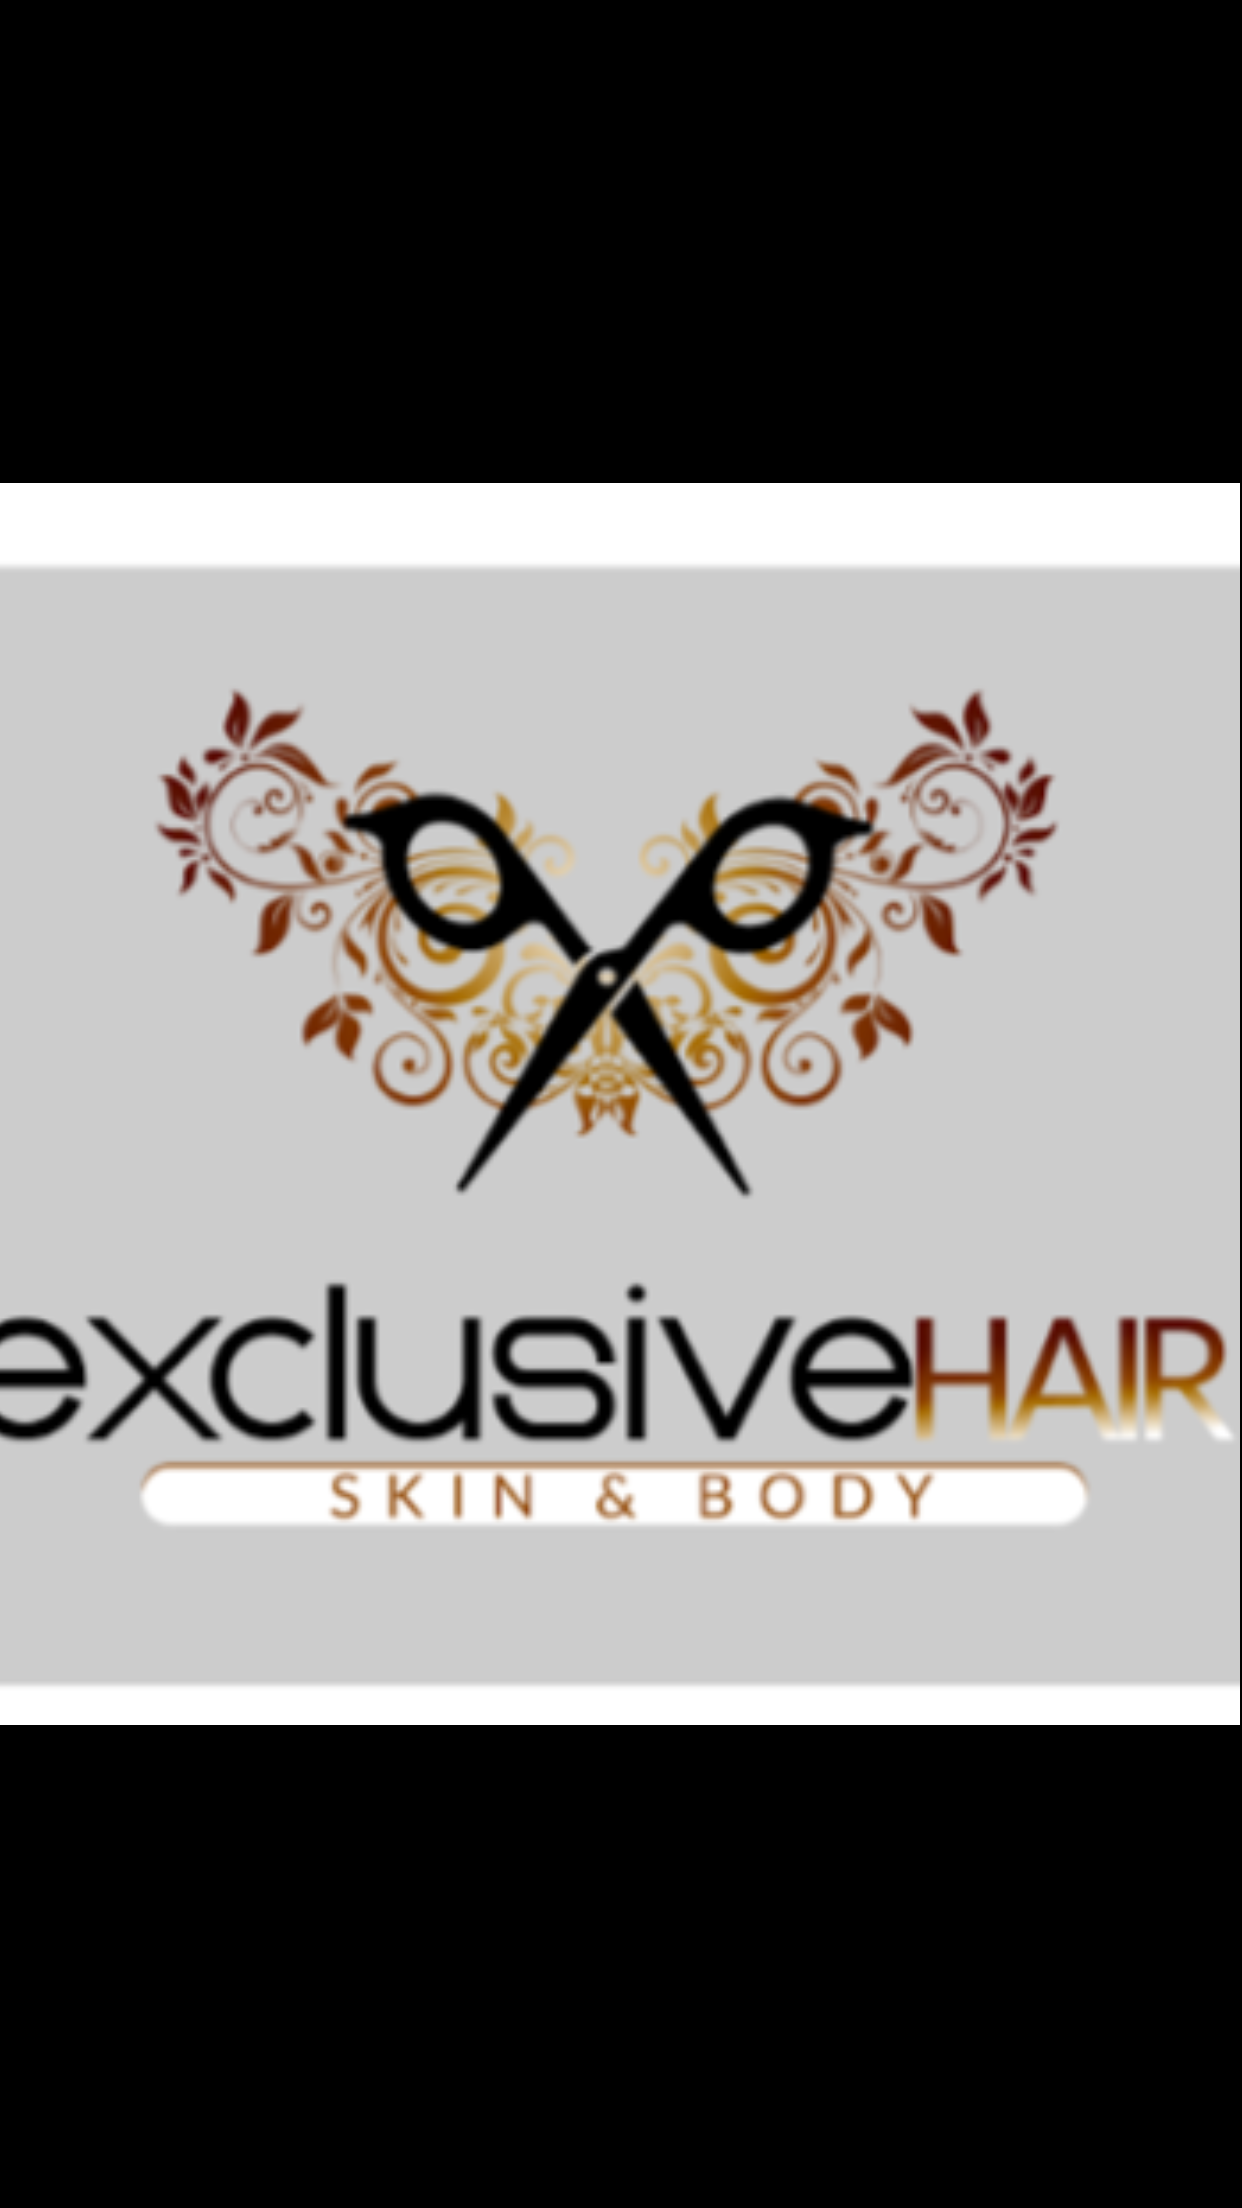 Exclusive Hair Skin And Body - Adelaide Hairdresser 1